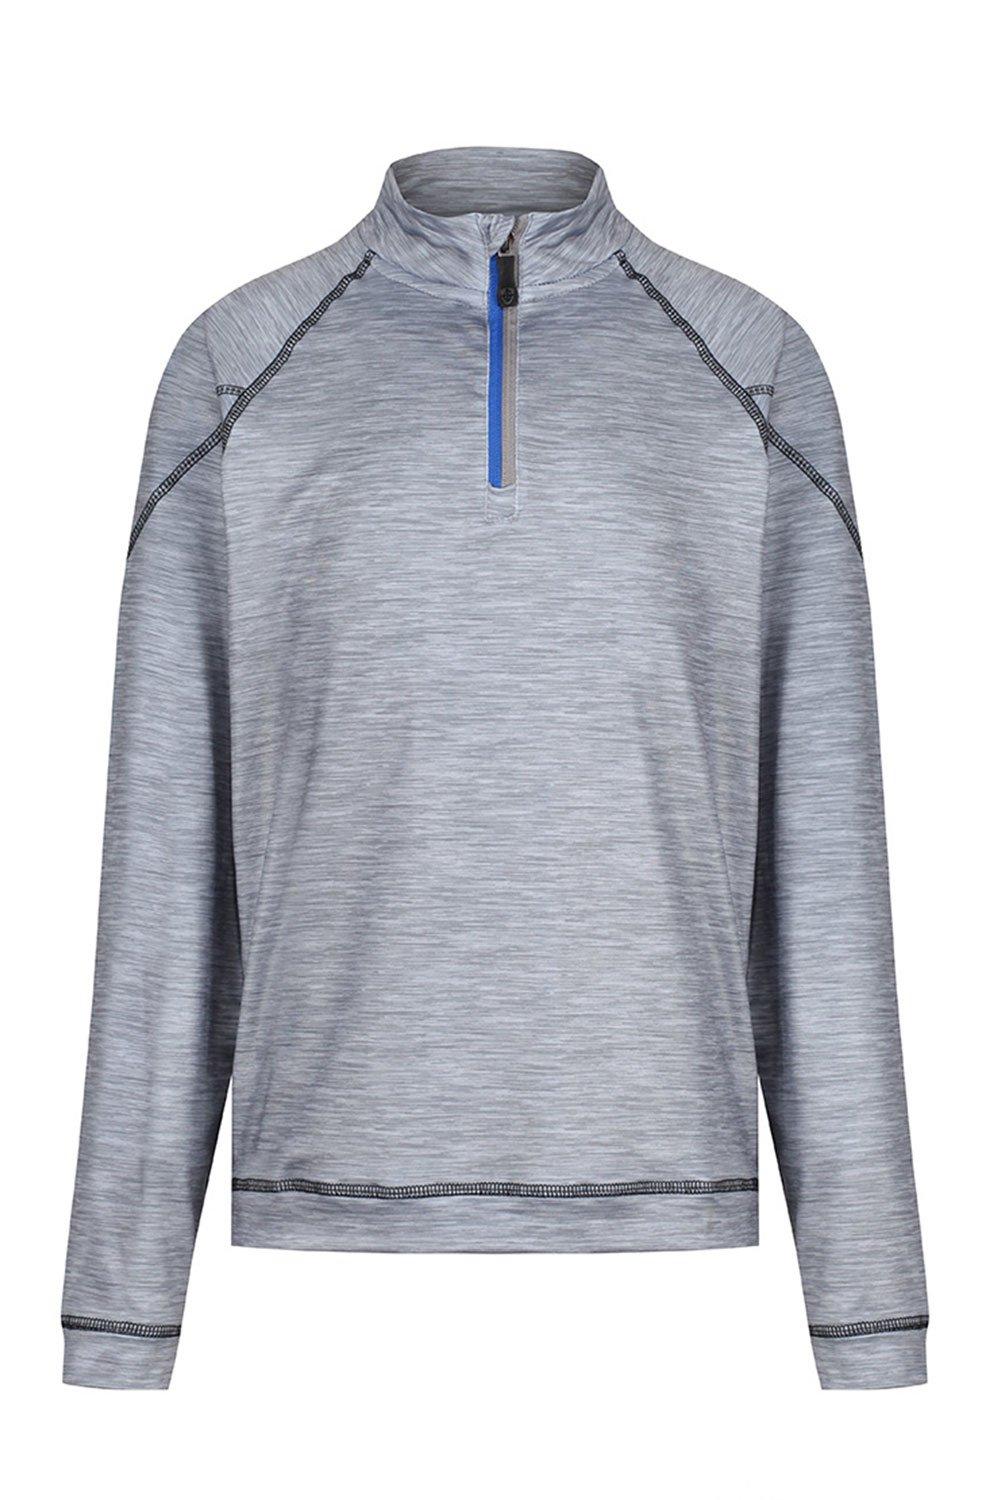 Performance Quick Dry Golf Top Layer